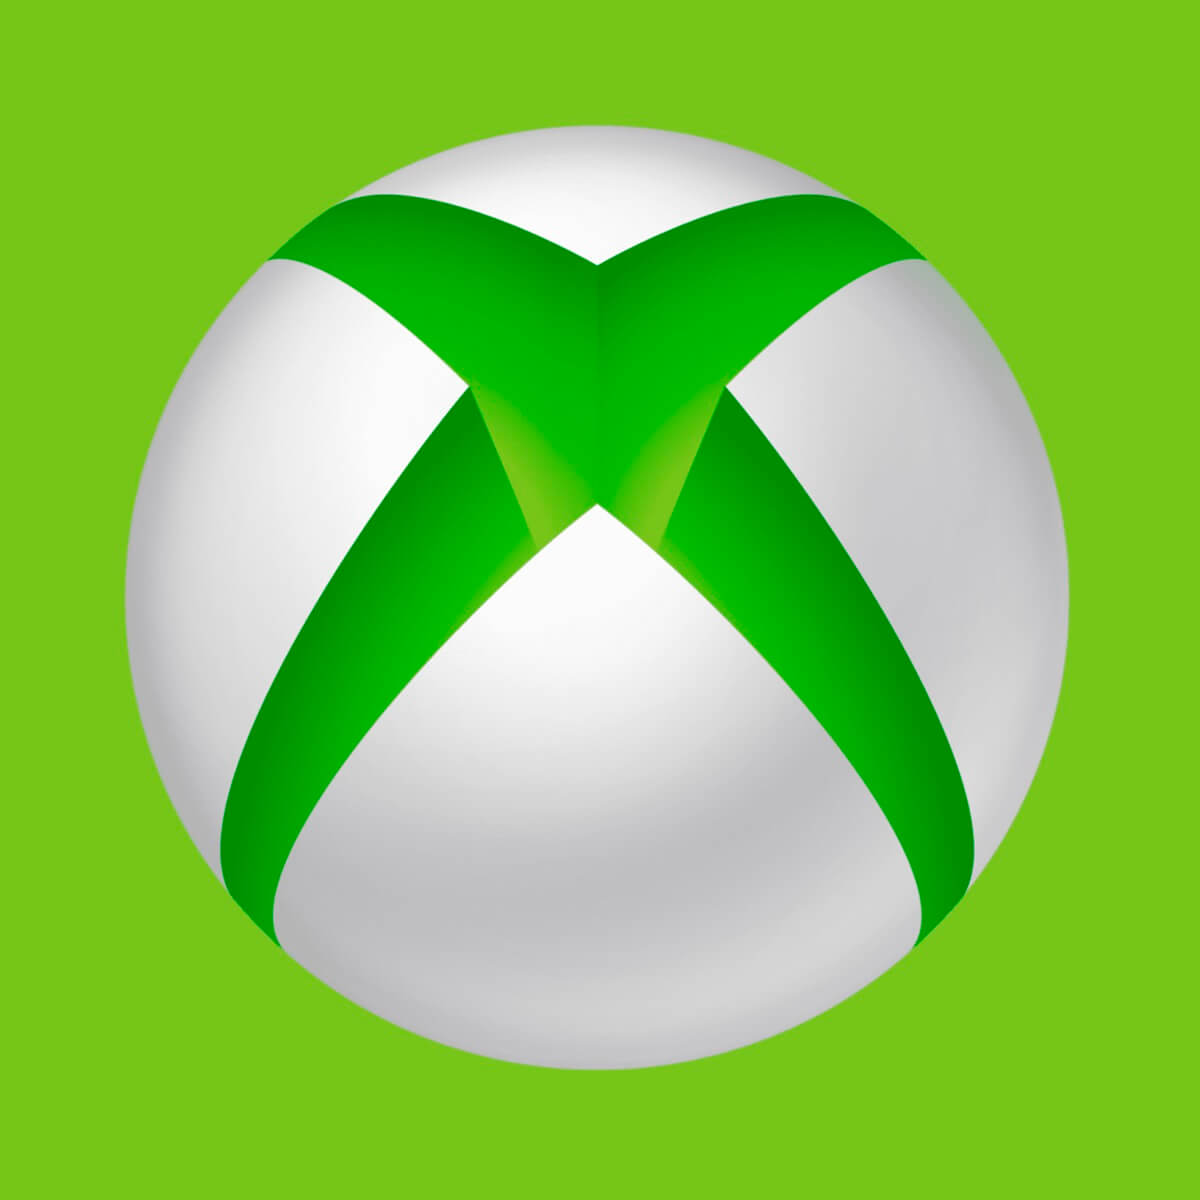 Ok so i changed my xbox gamertag once but i want to change my